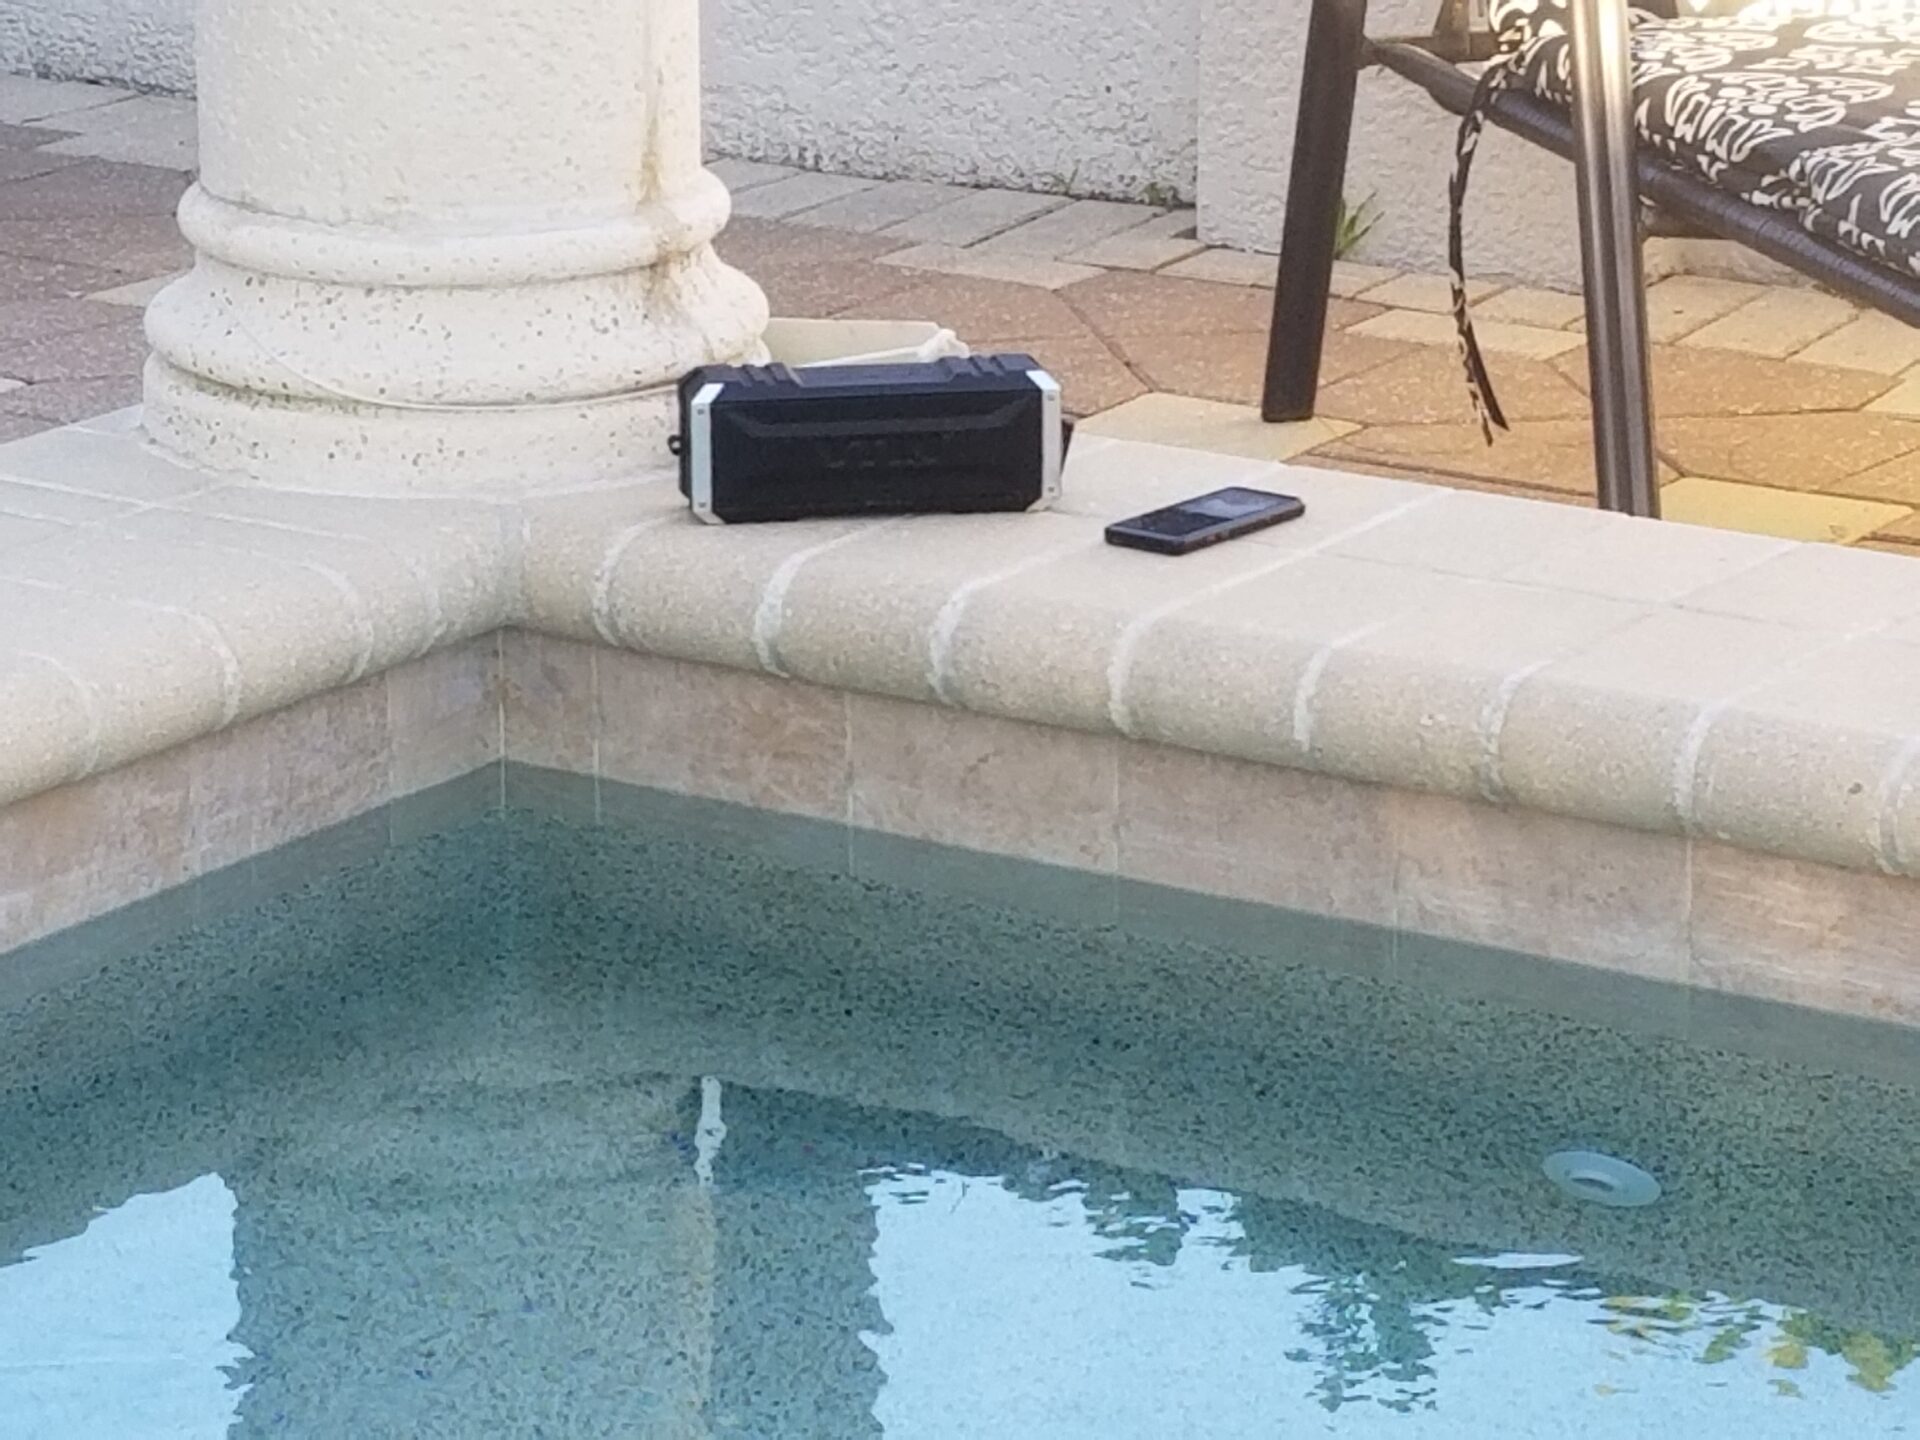 portable speaker and MP3 player on cement wall poolside